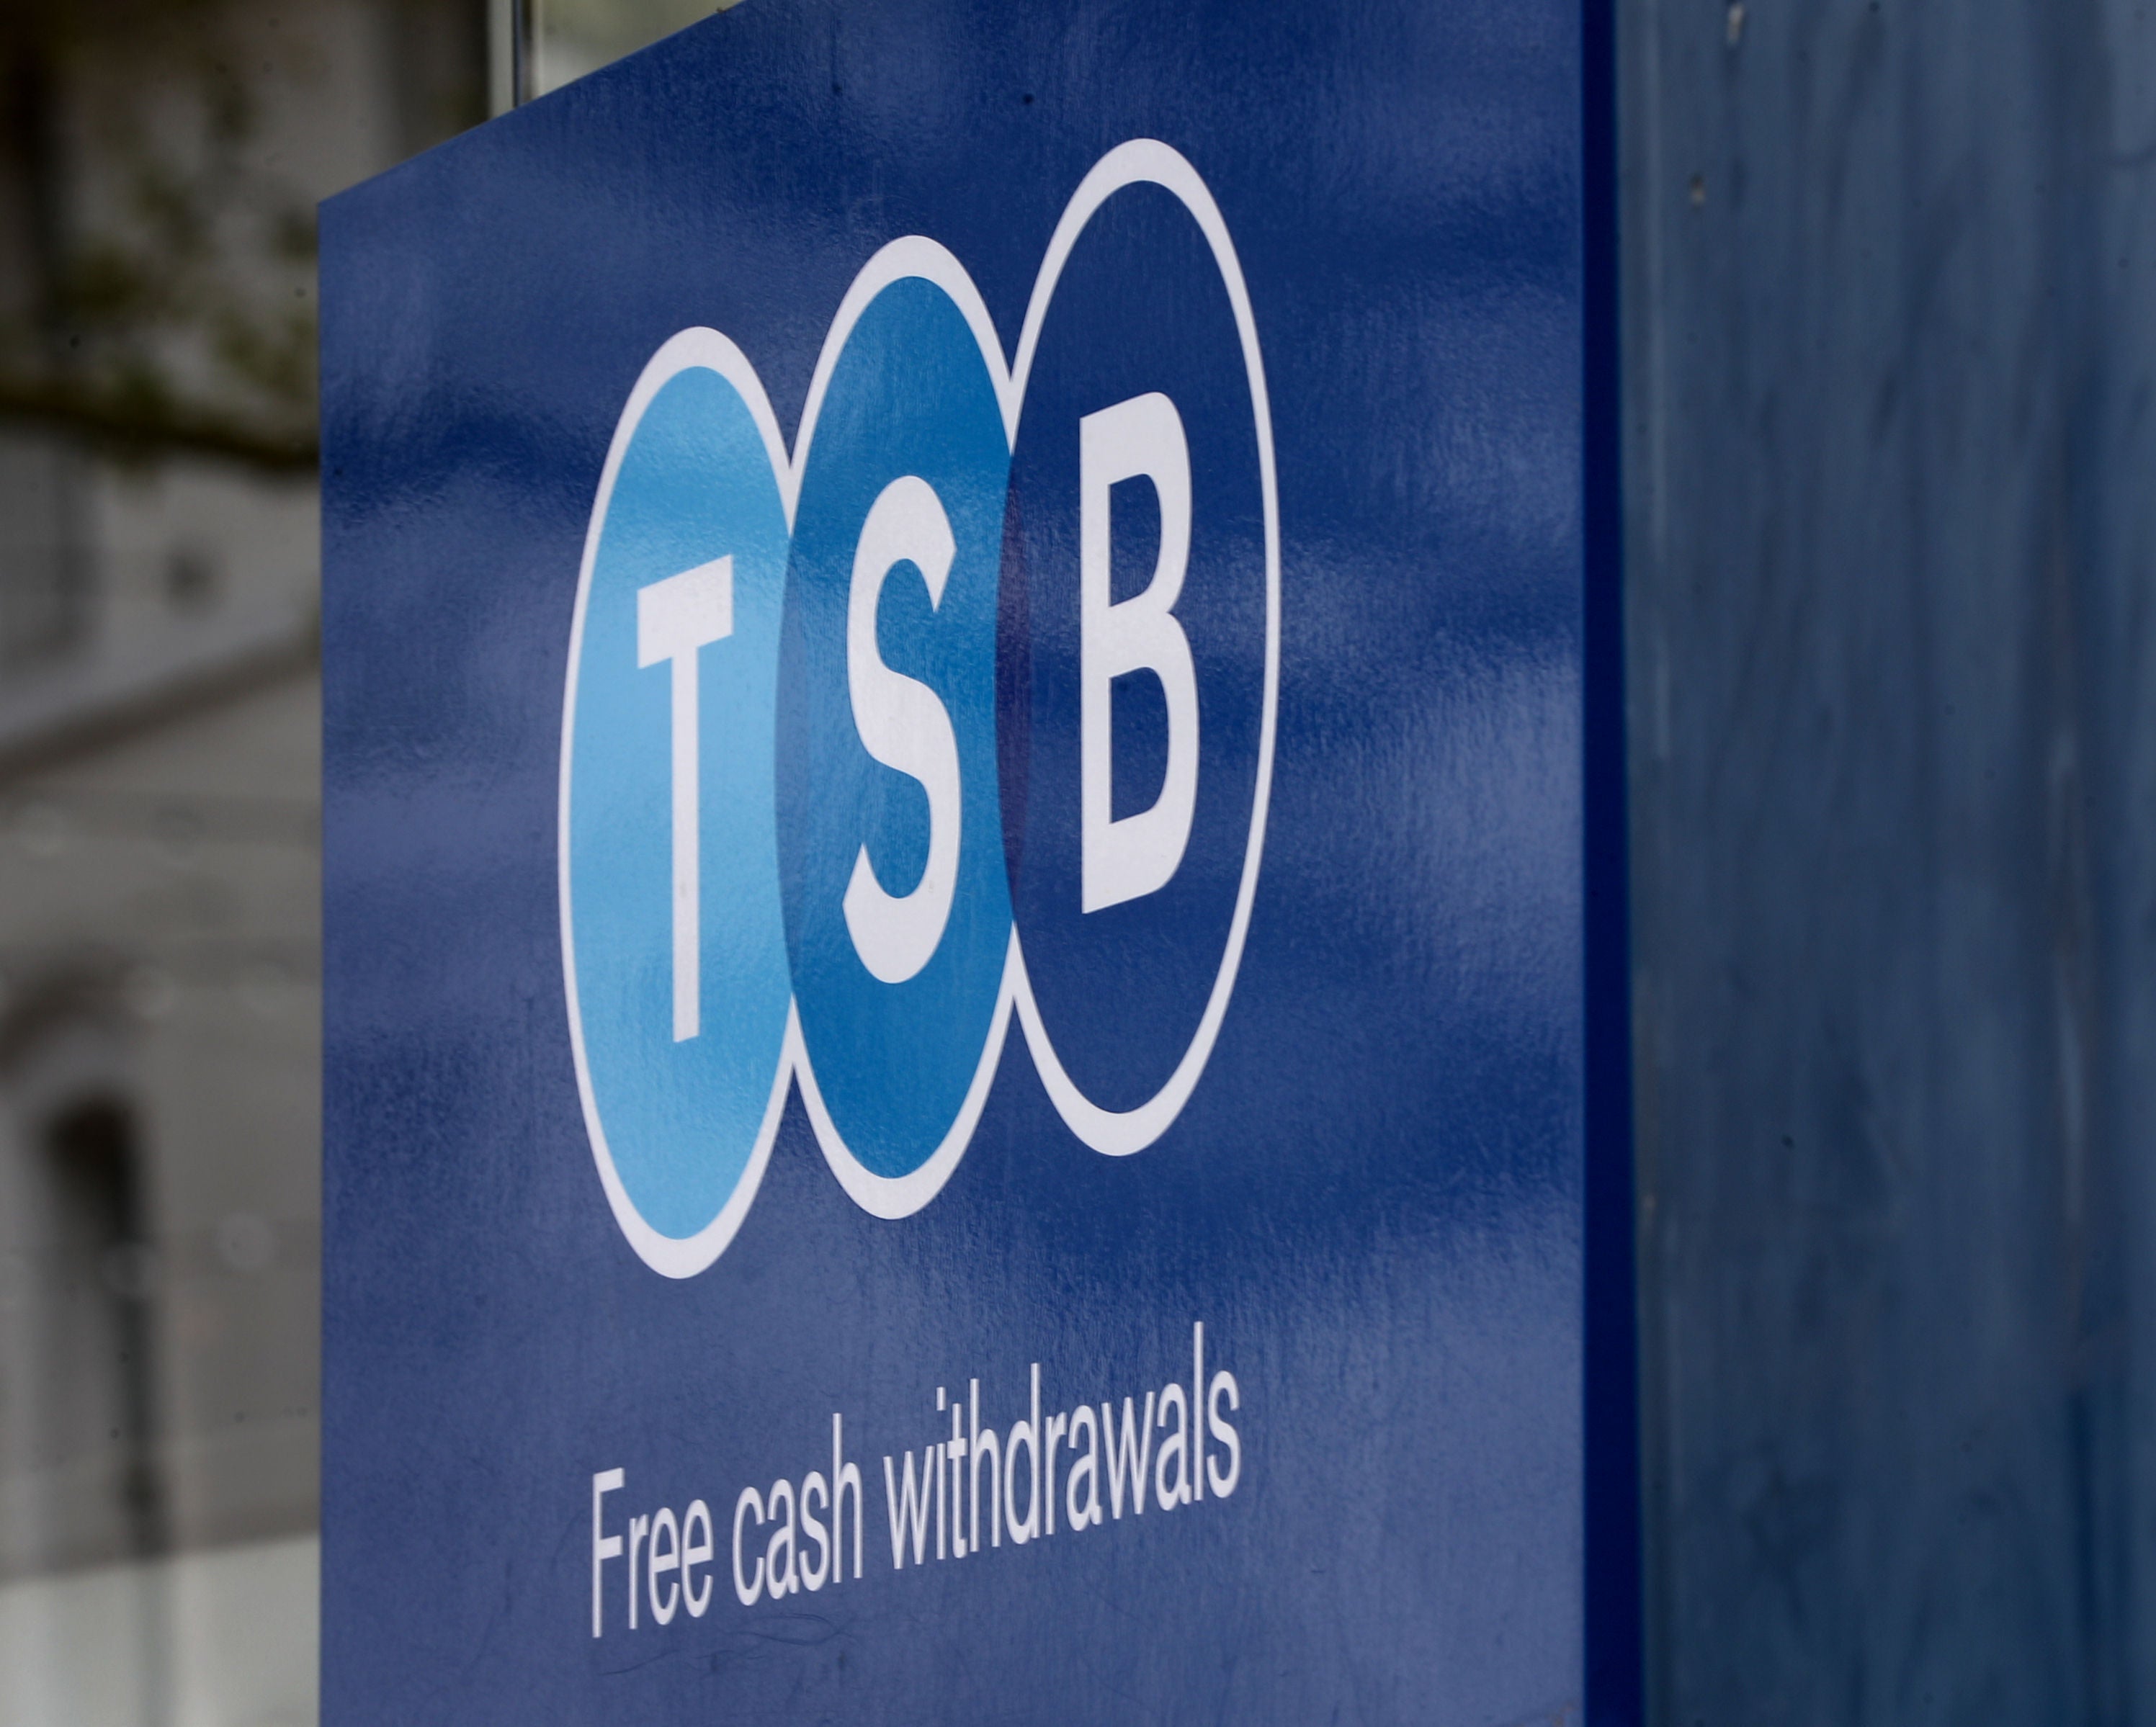 Nine in 10 customer transactions are now done online, TSB said (Gareth Fuller/PA)